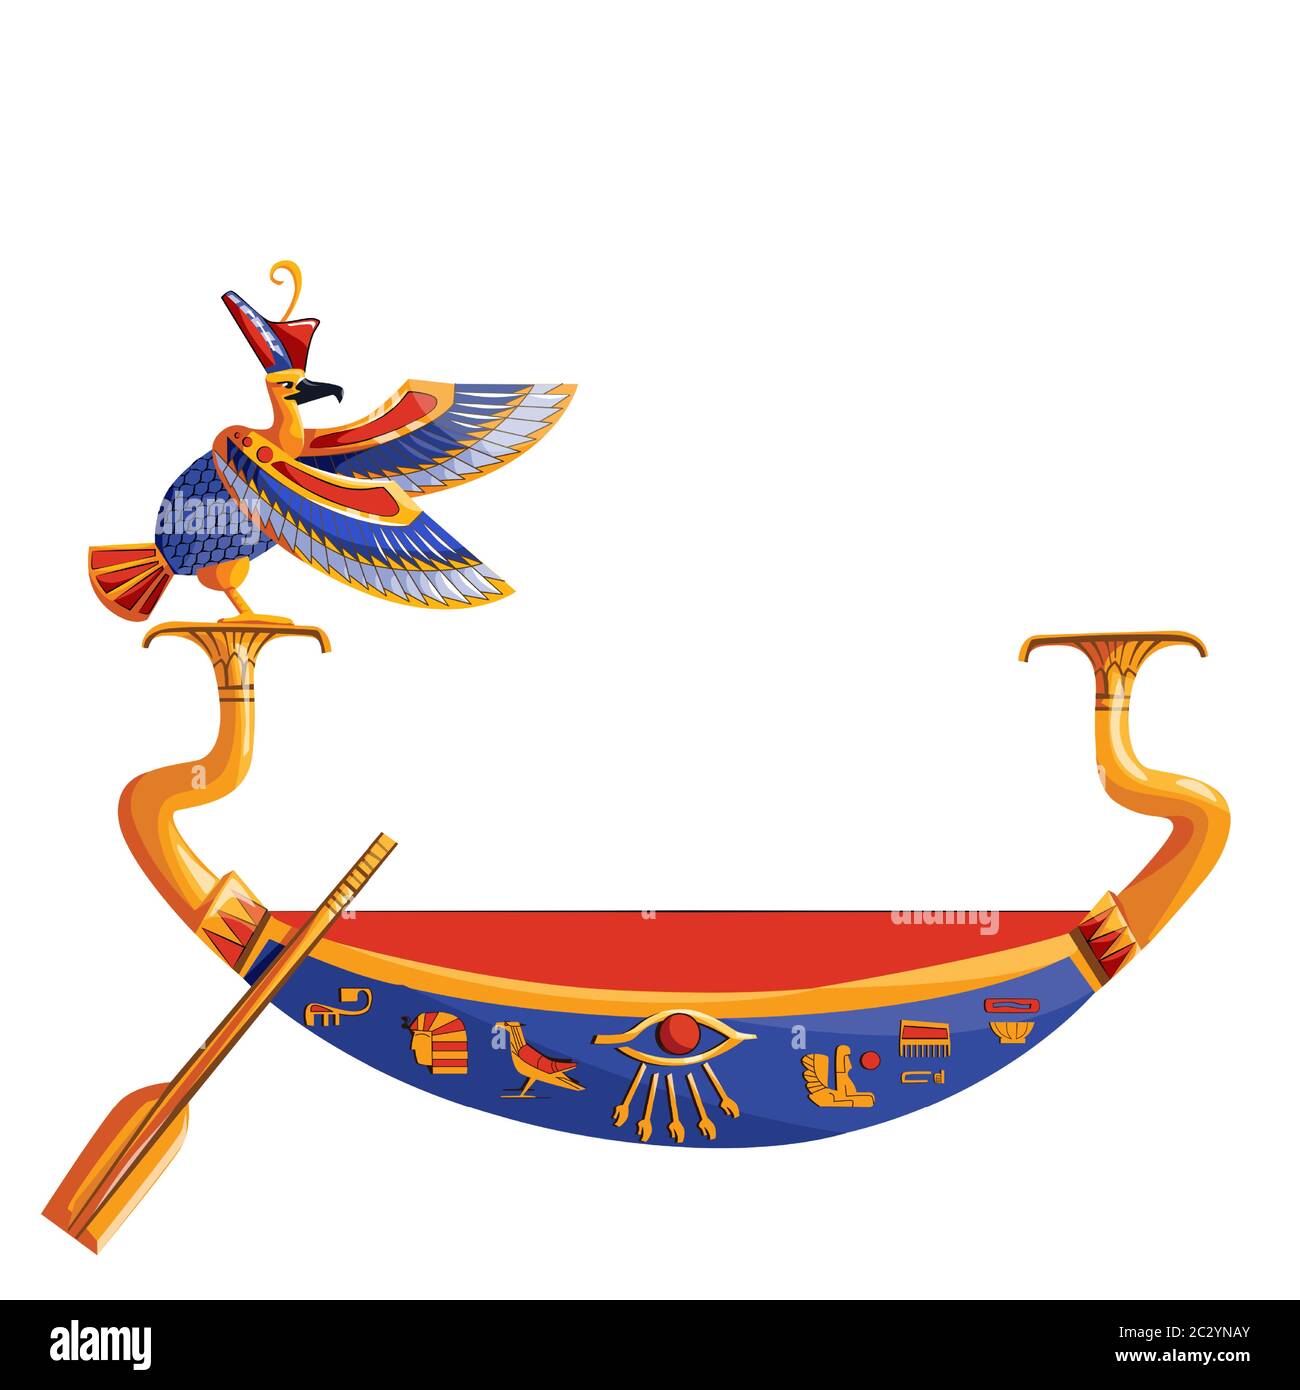 Ancient Egypt wooden boat with oar or paddle for sun god trip cartoon vector illustration. Egyptian culture religious symbol, decorated barque with bi Stock Vector